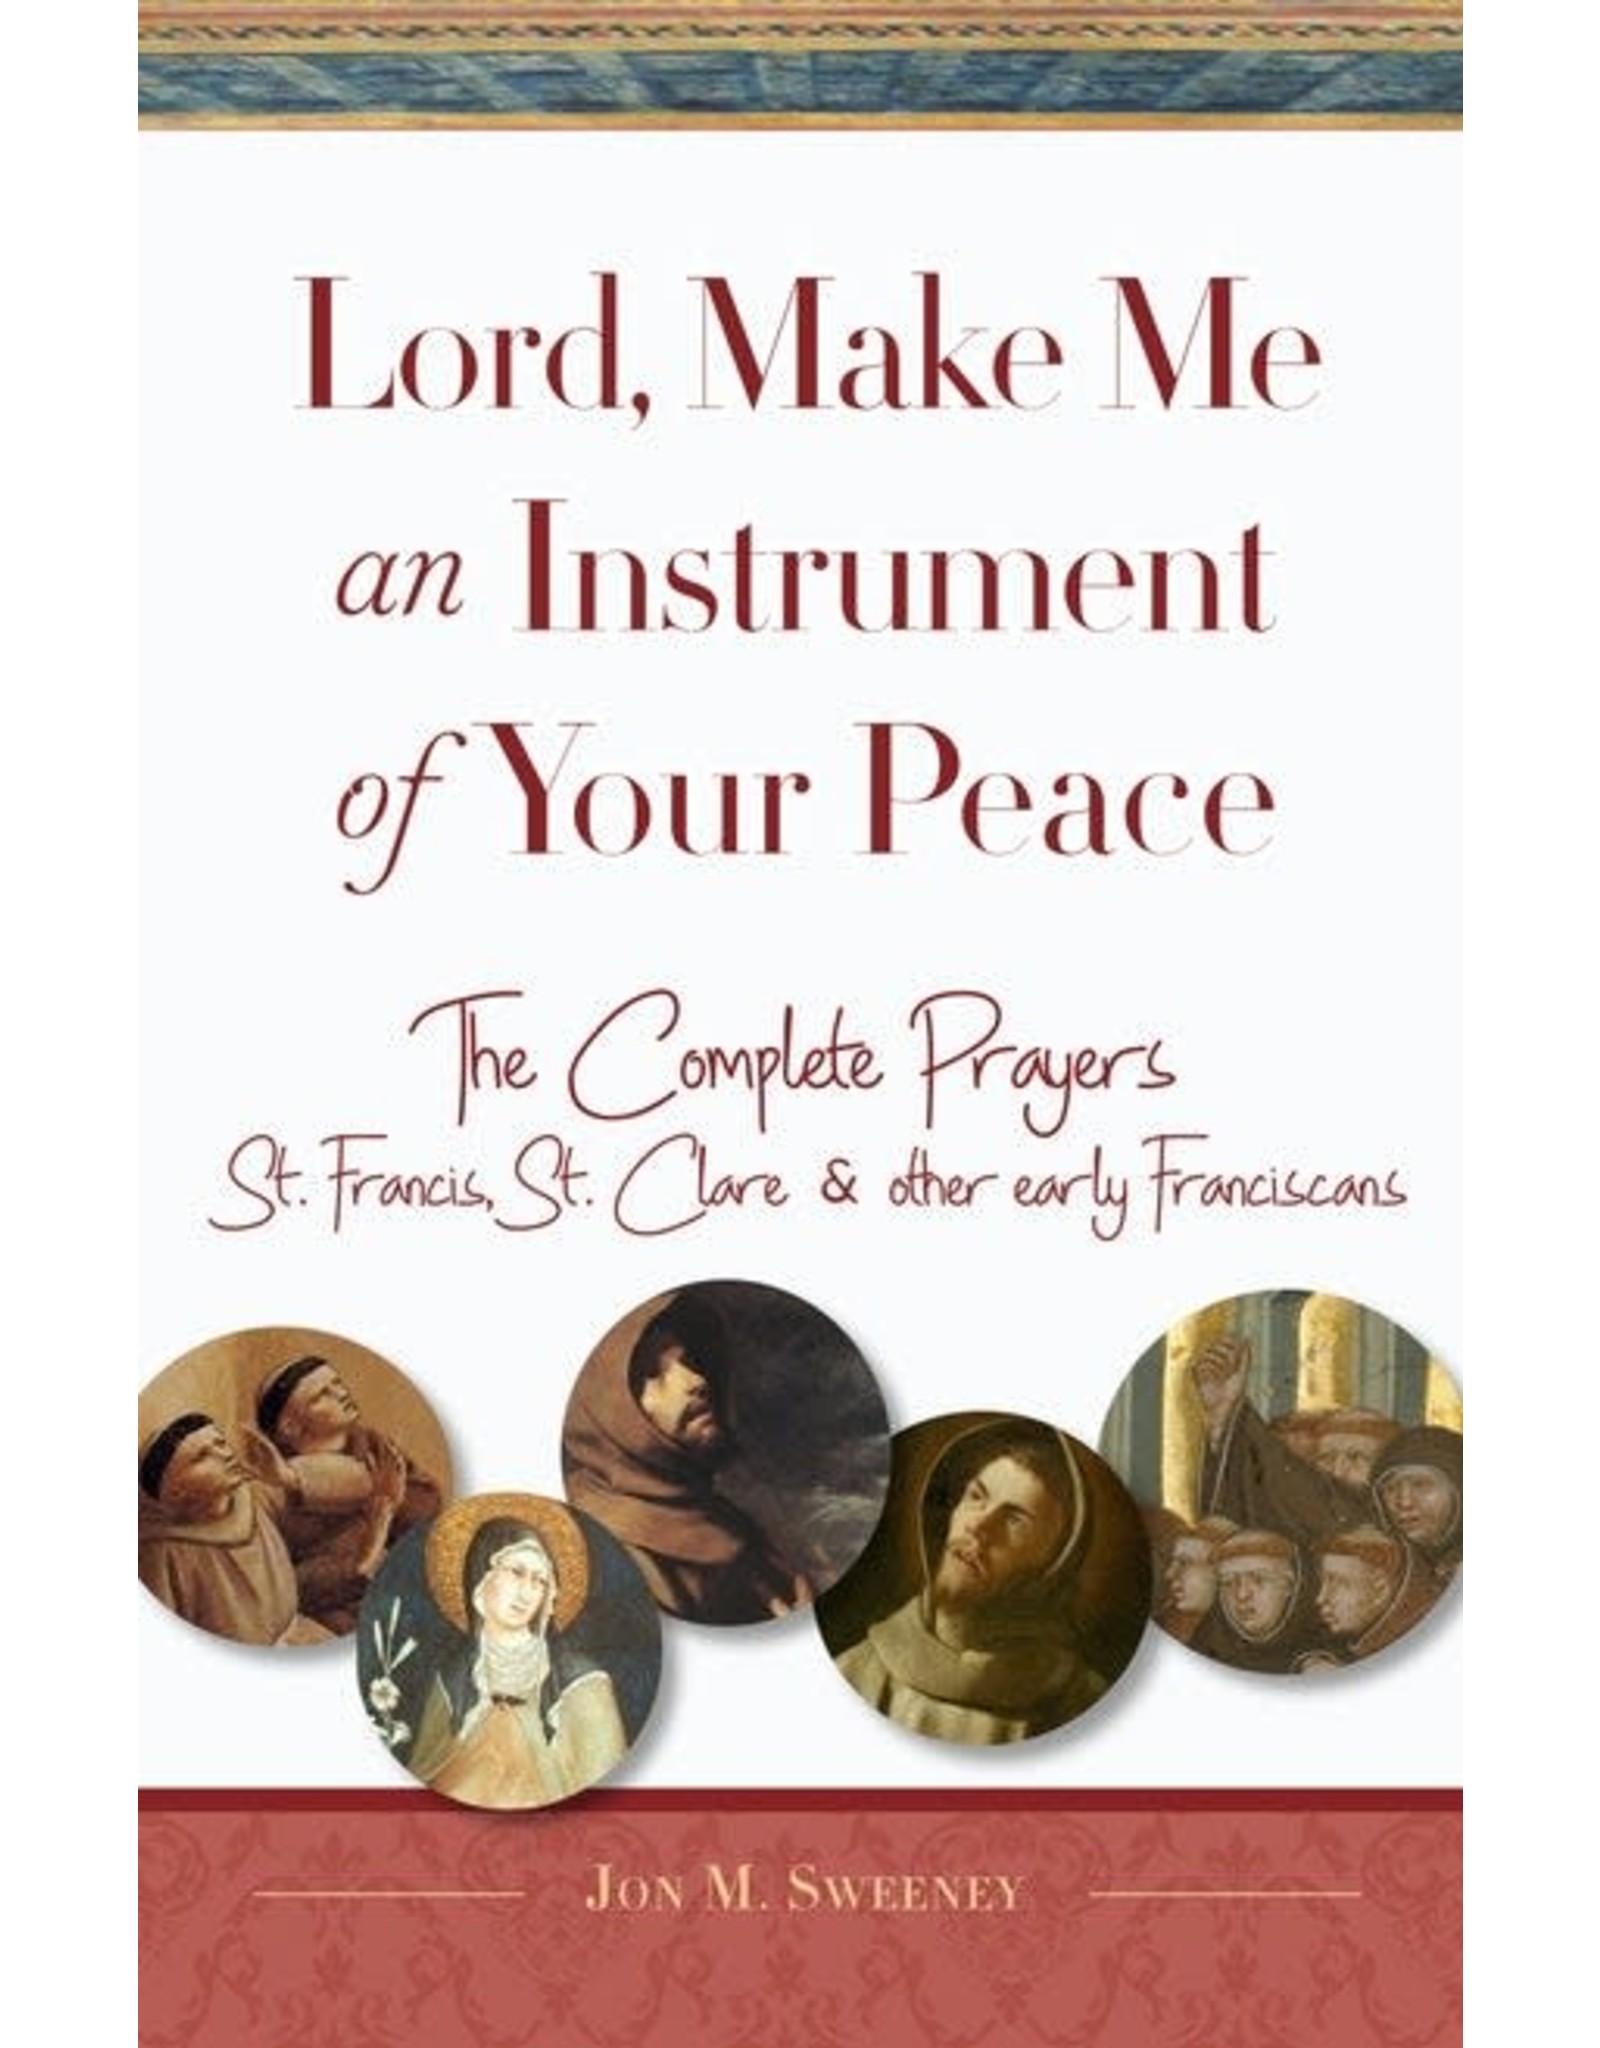 Paraclete Press Lord, Make Me An Instrument of Your Peace The Complete Prayers of St. Francis, St. Clare, & other early Franciscans By Jon M. Sweeney (Paperback)